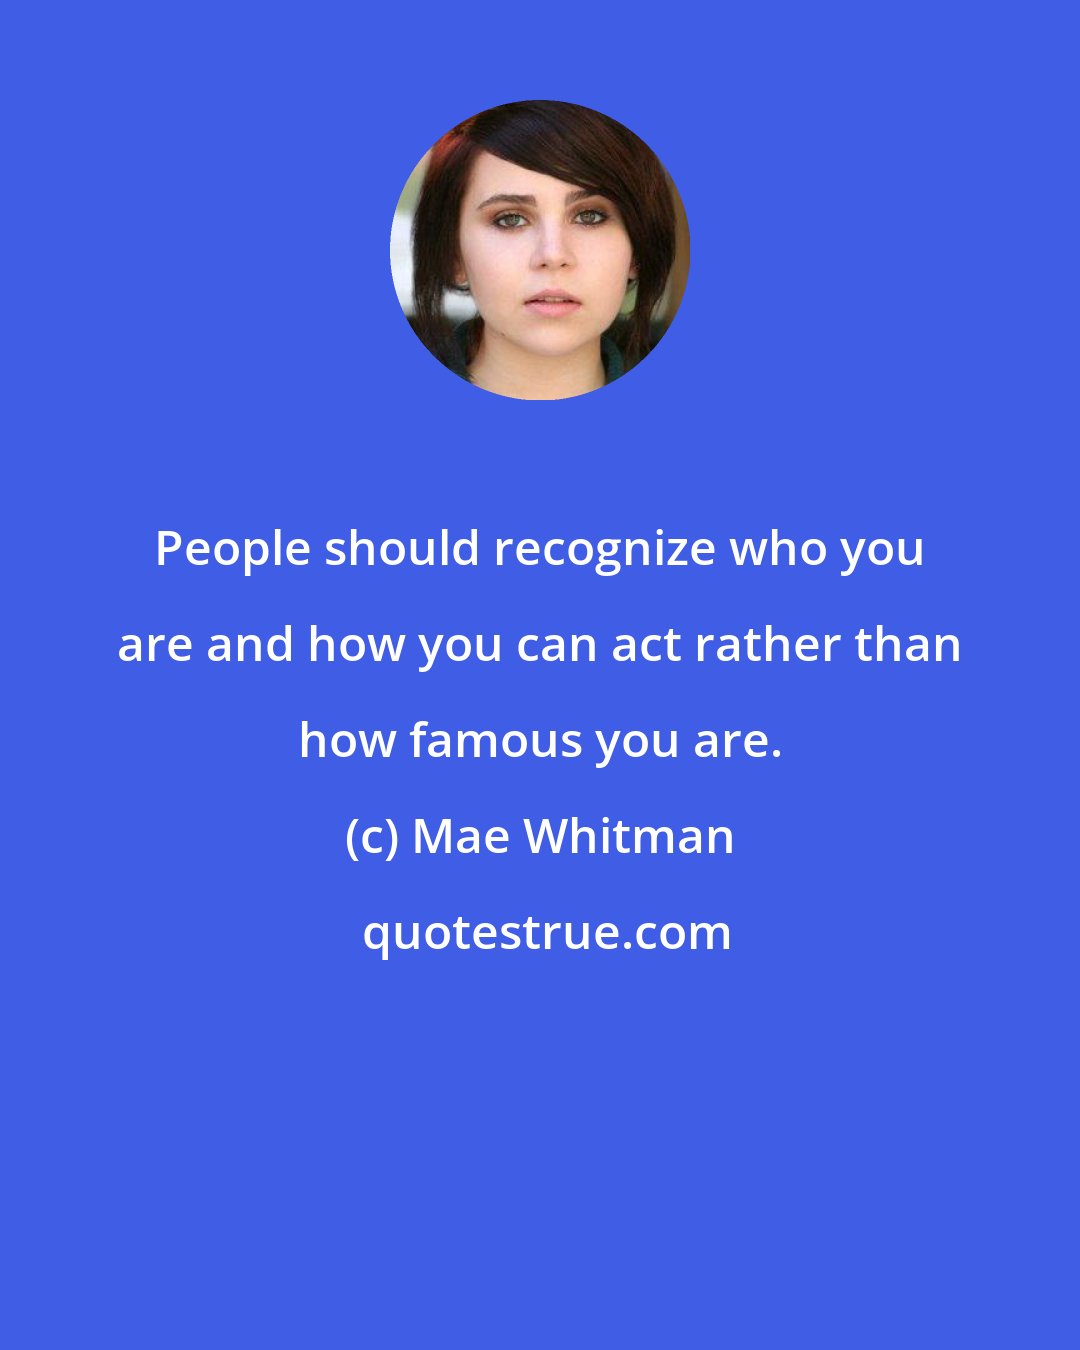 Mae Whitman: People should recognize who you are and how you can act rather than how famous you are.